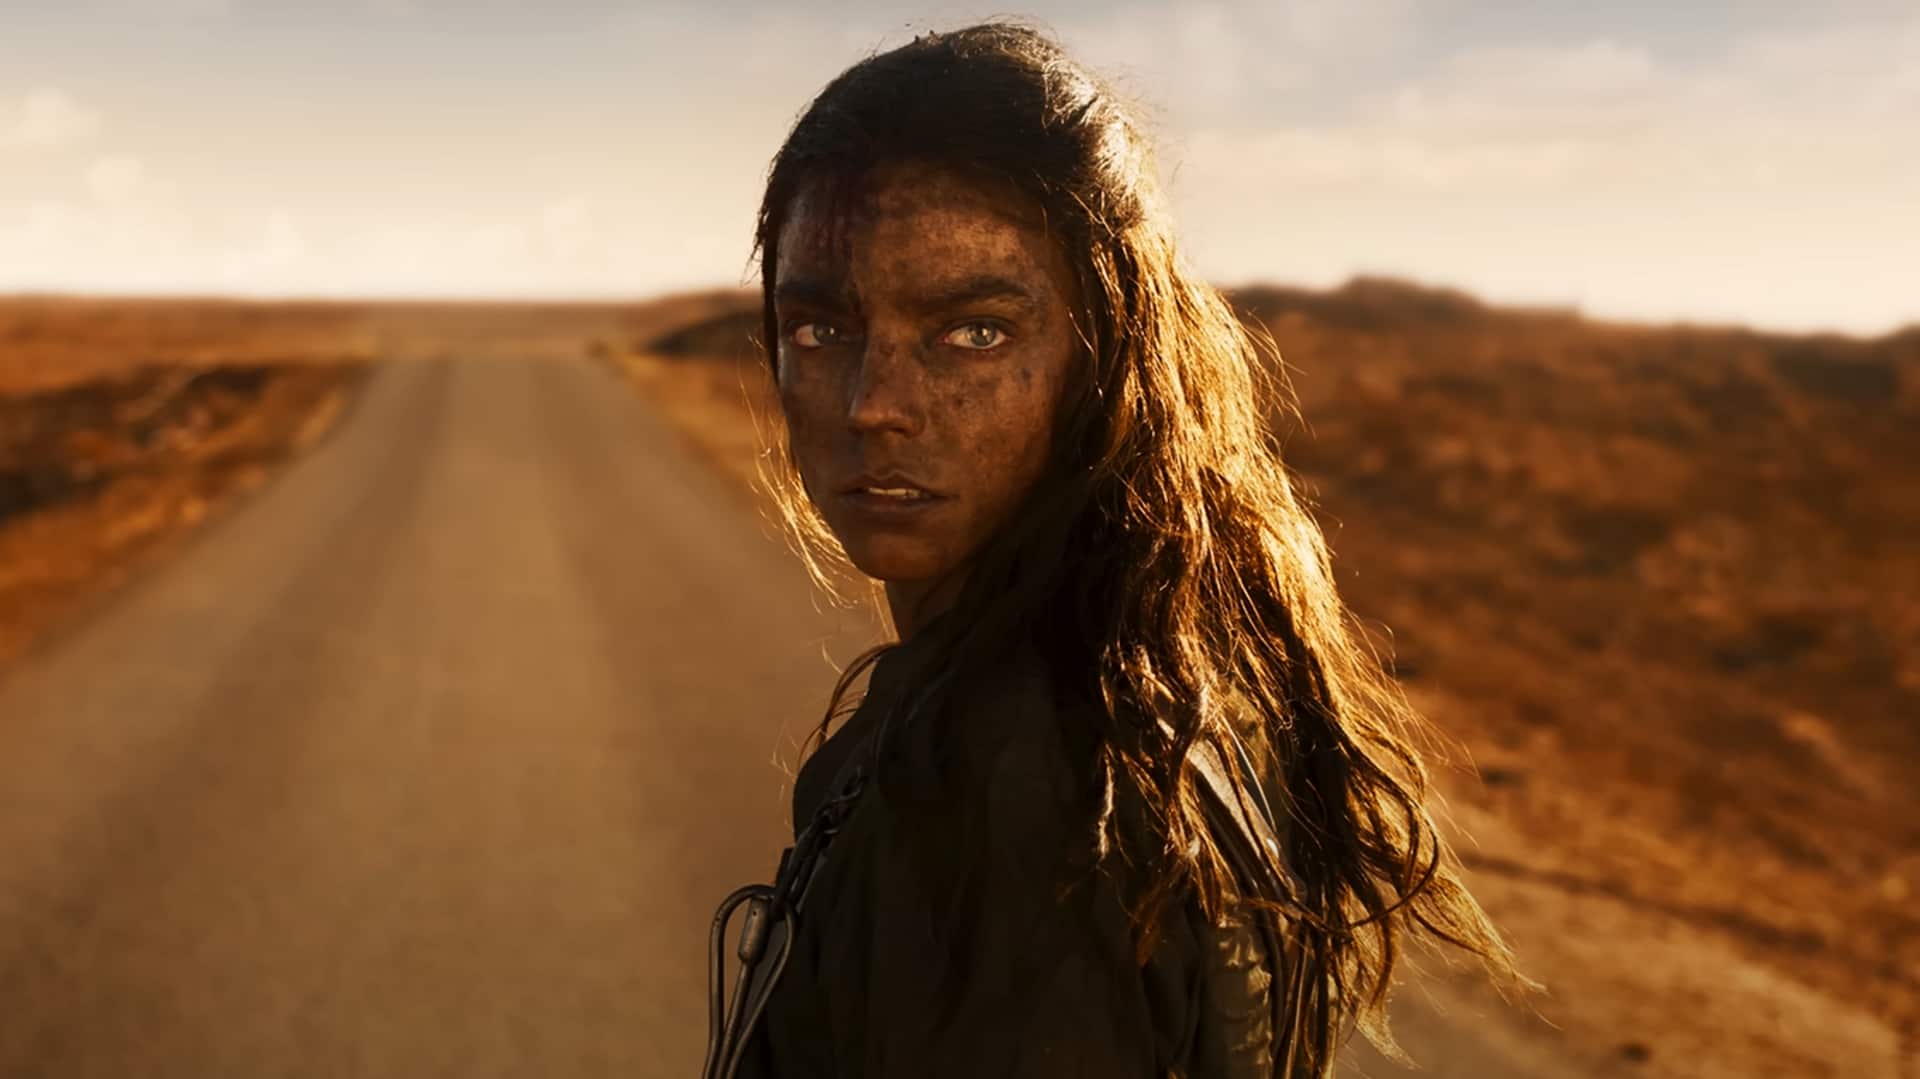 Ahead of 'Furiosa,' watch 'Mad Max' films in chronological order